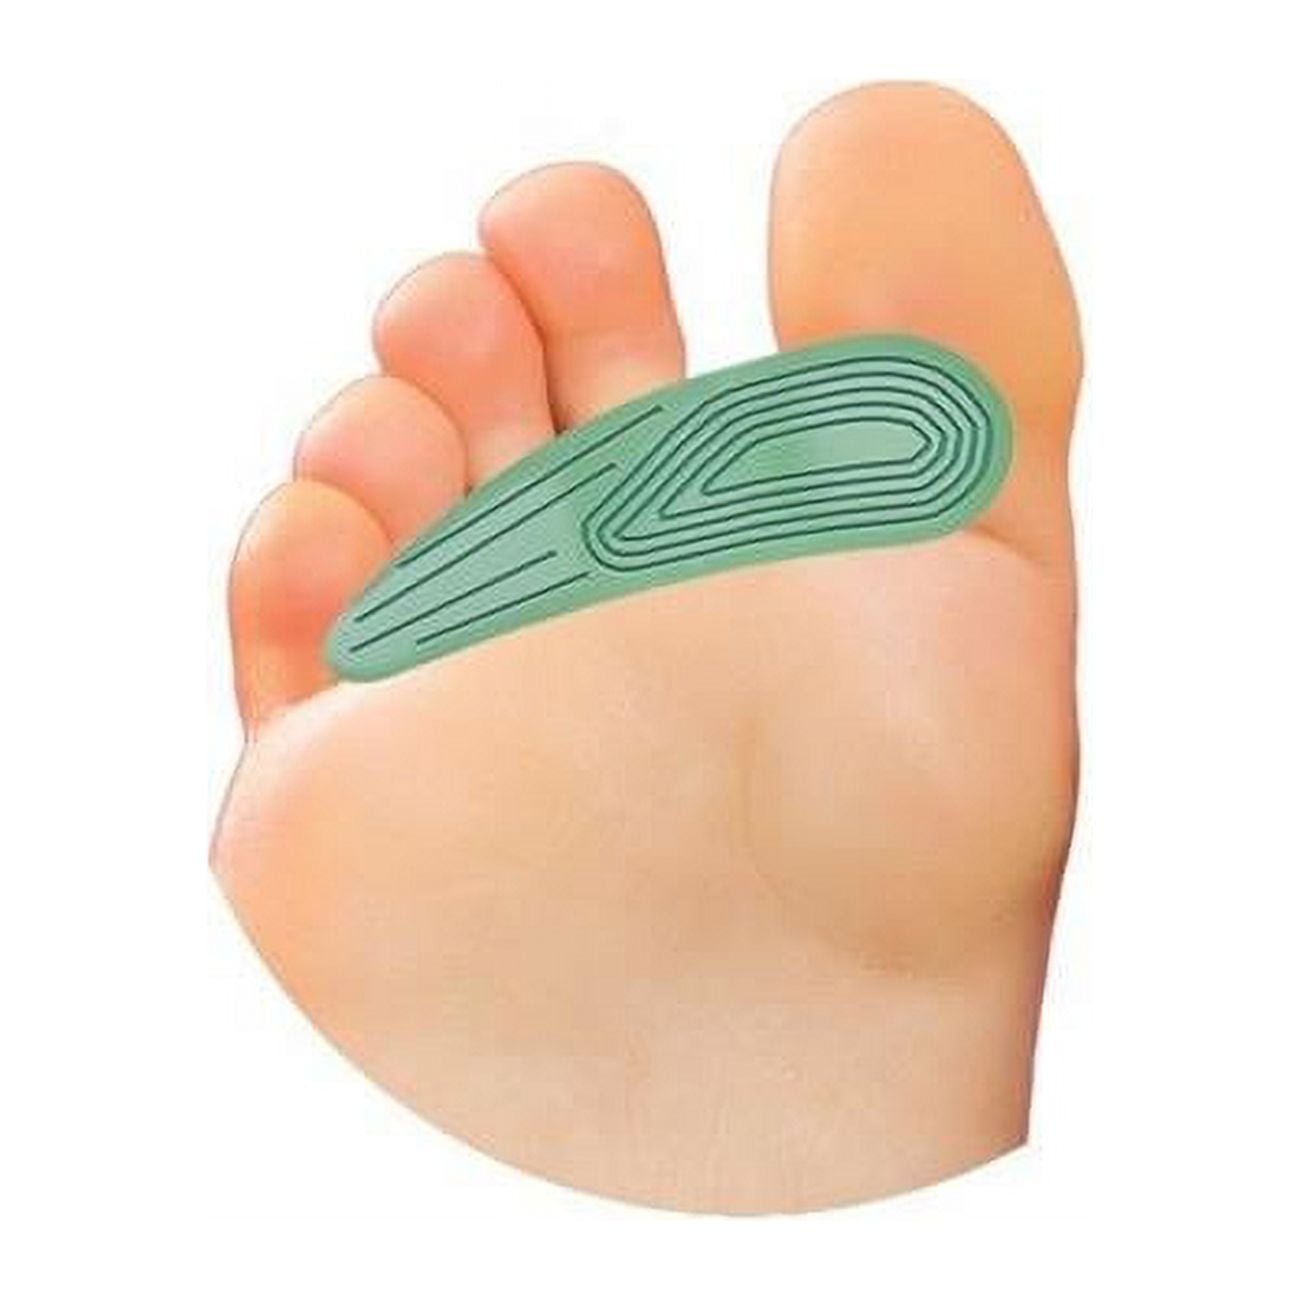 0041465 Menthogel Toes Cushion Pads, 2 Piece